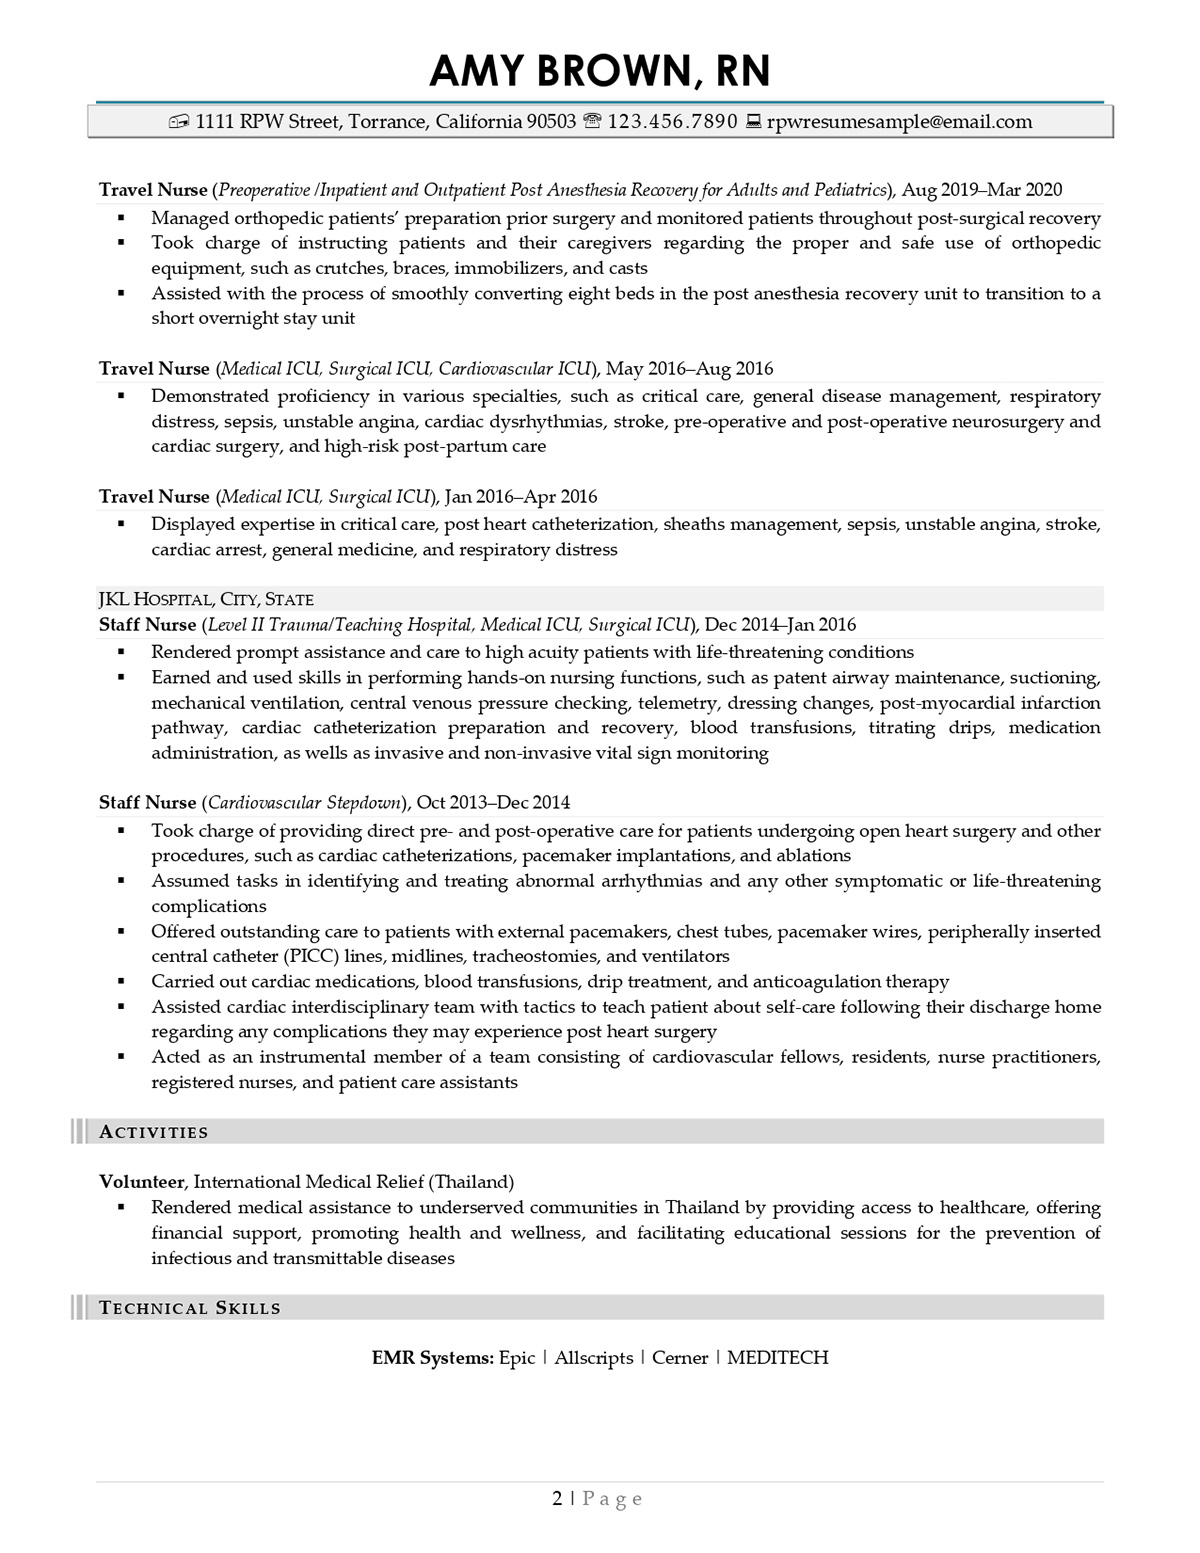 Travel Nurse Resume Sample Page 2 From Resume Professional Writers